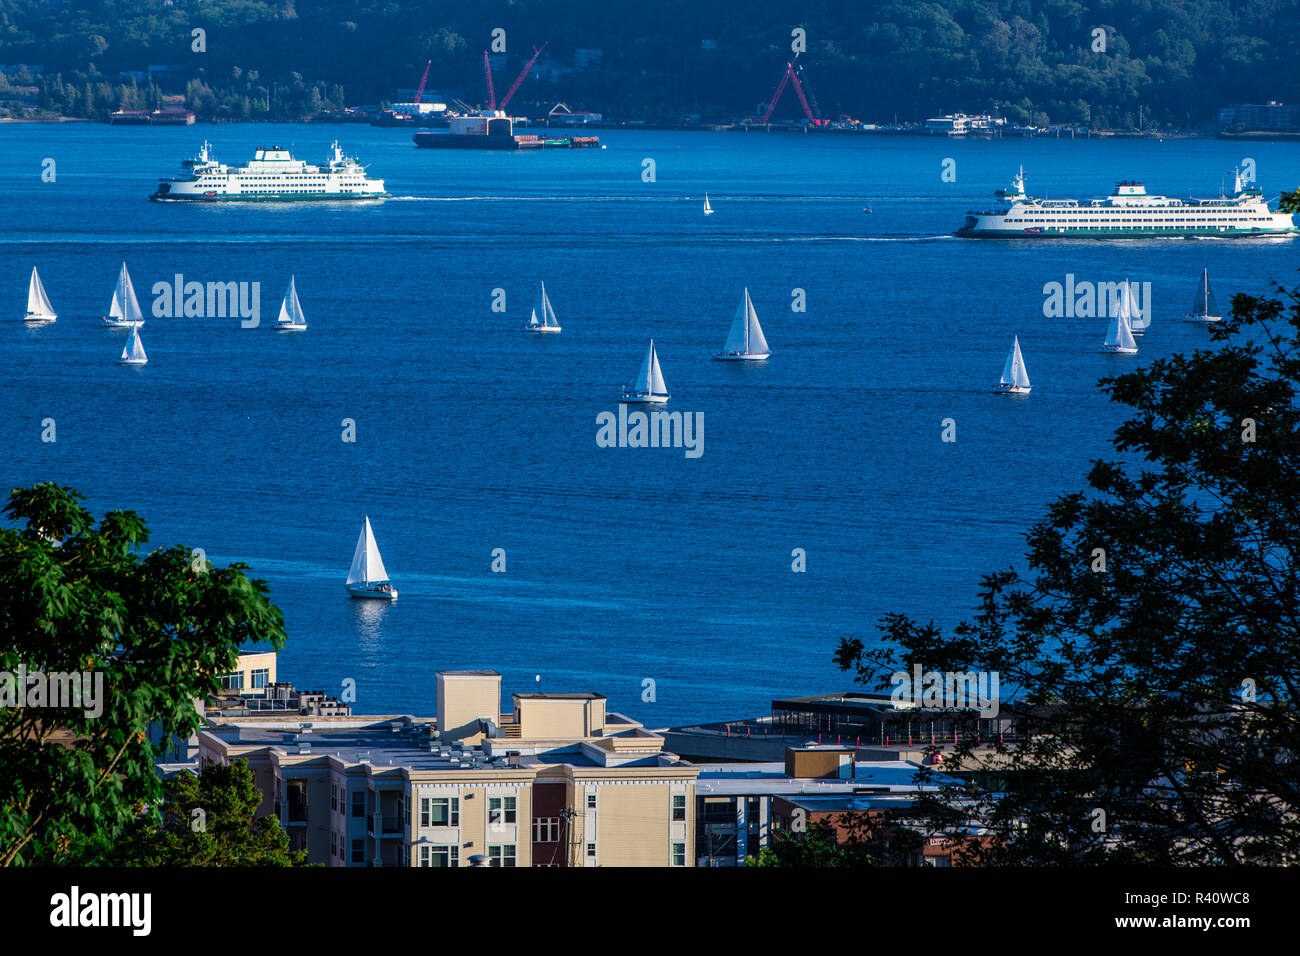 Seattle, Washington State. Two ferry boats, sailboat racing regatta, buildings and port industry Stock Photo